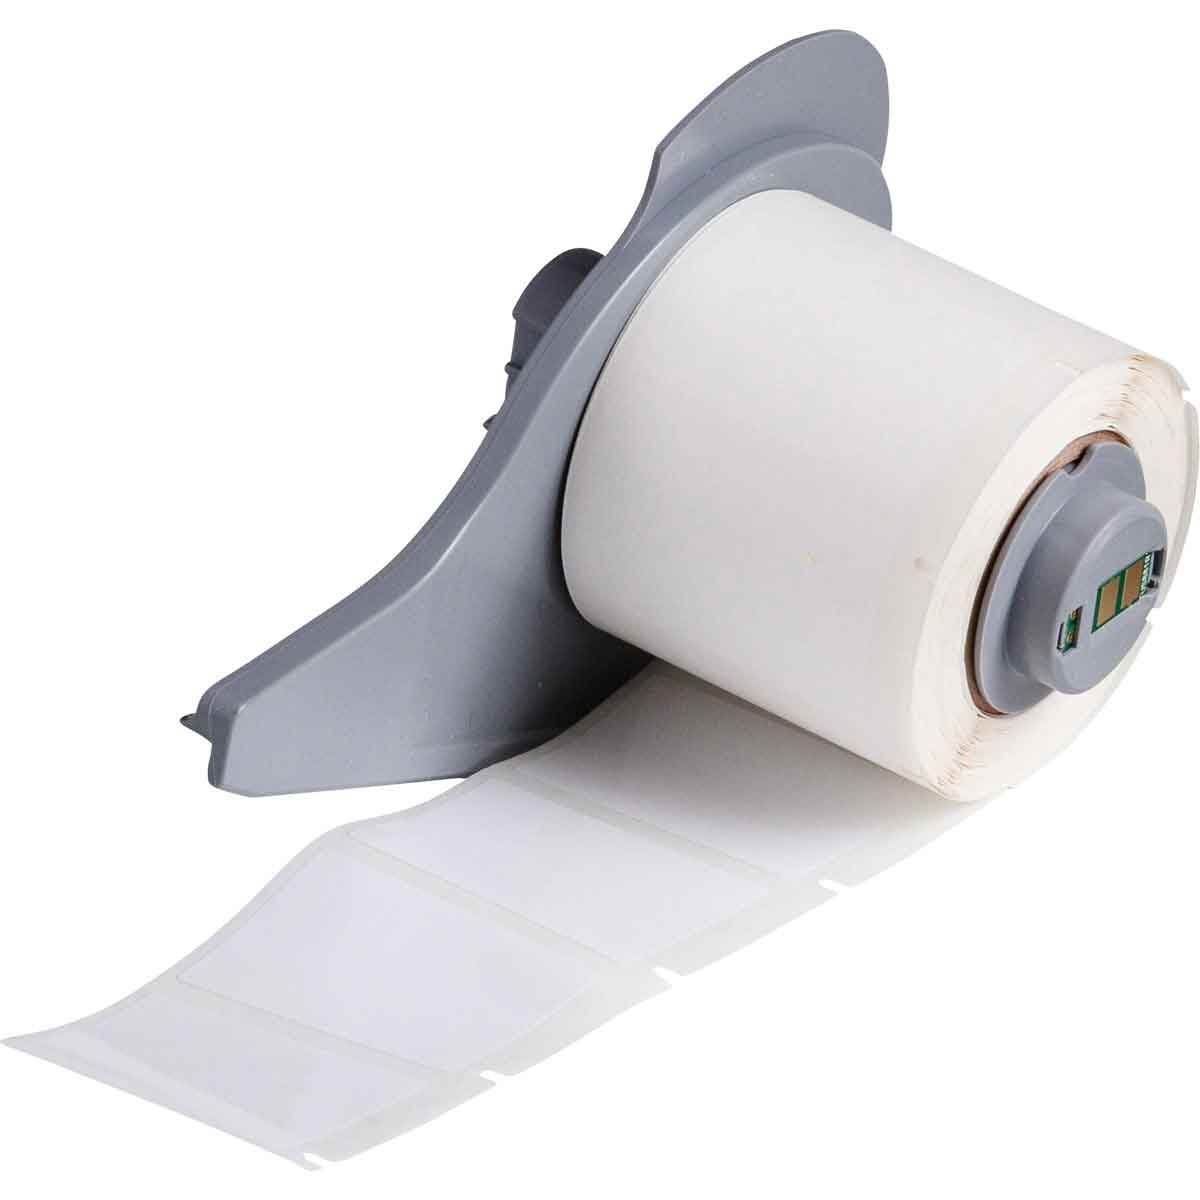 White Brady M71-30-422 Permanent Polyester BMP71 Labels 250 Labels per Roll, 1 Roll per Package 